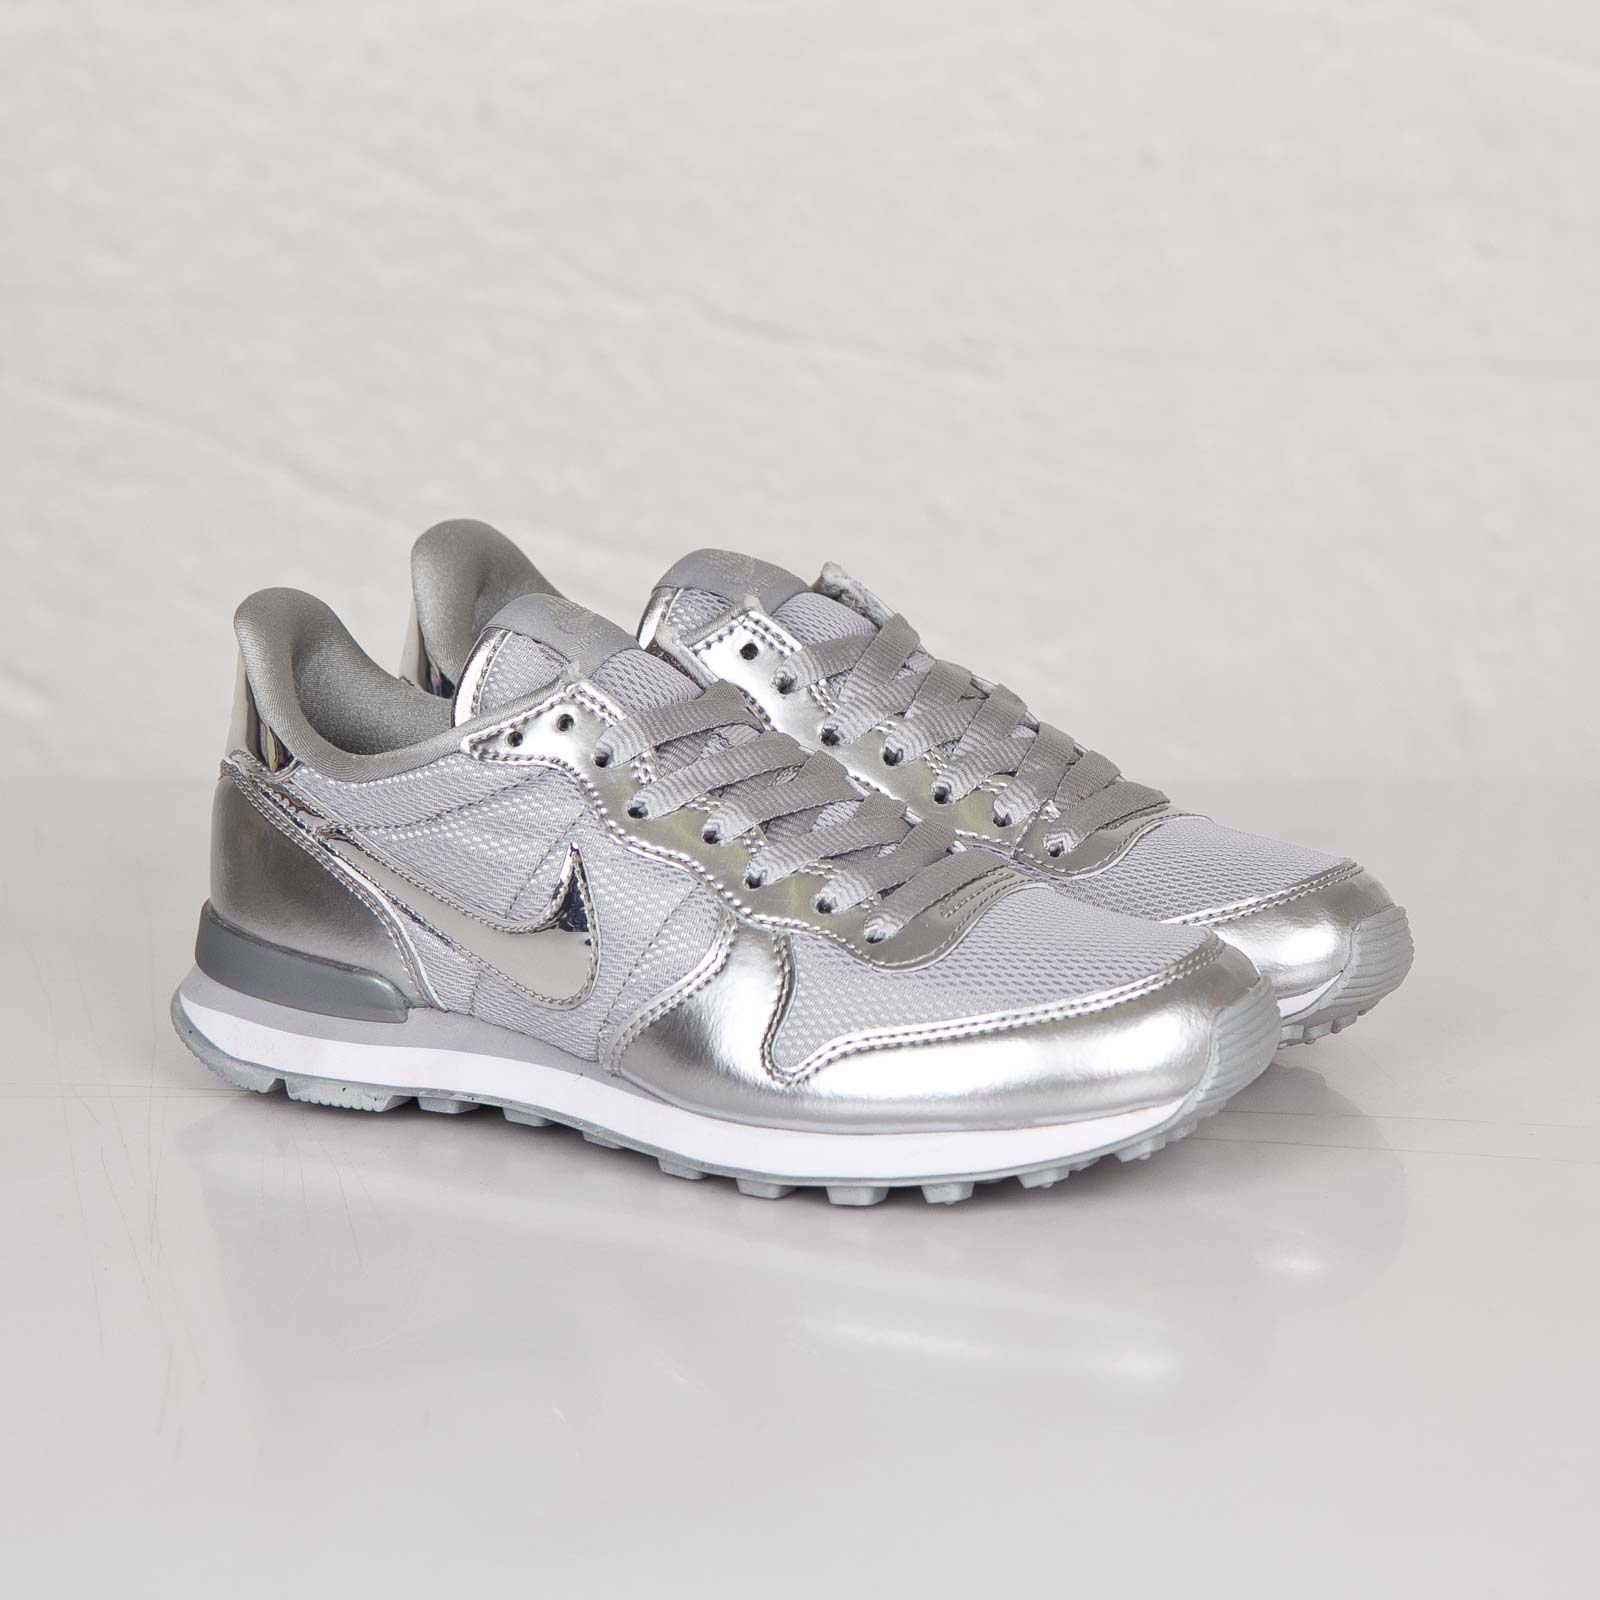 nike silver metallic buy clothes shoes online